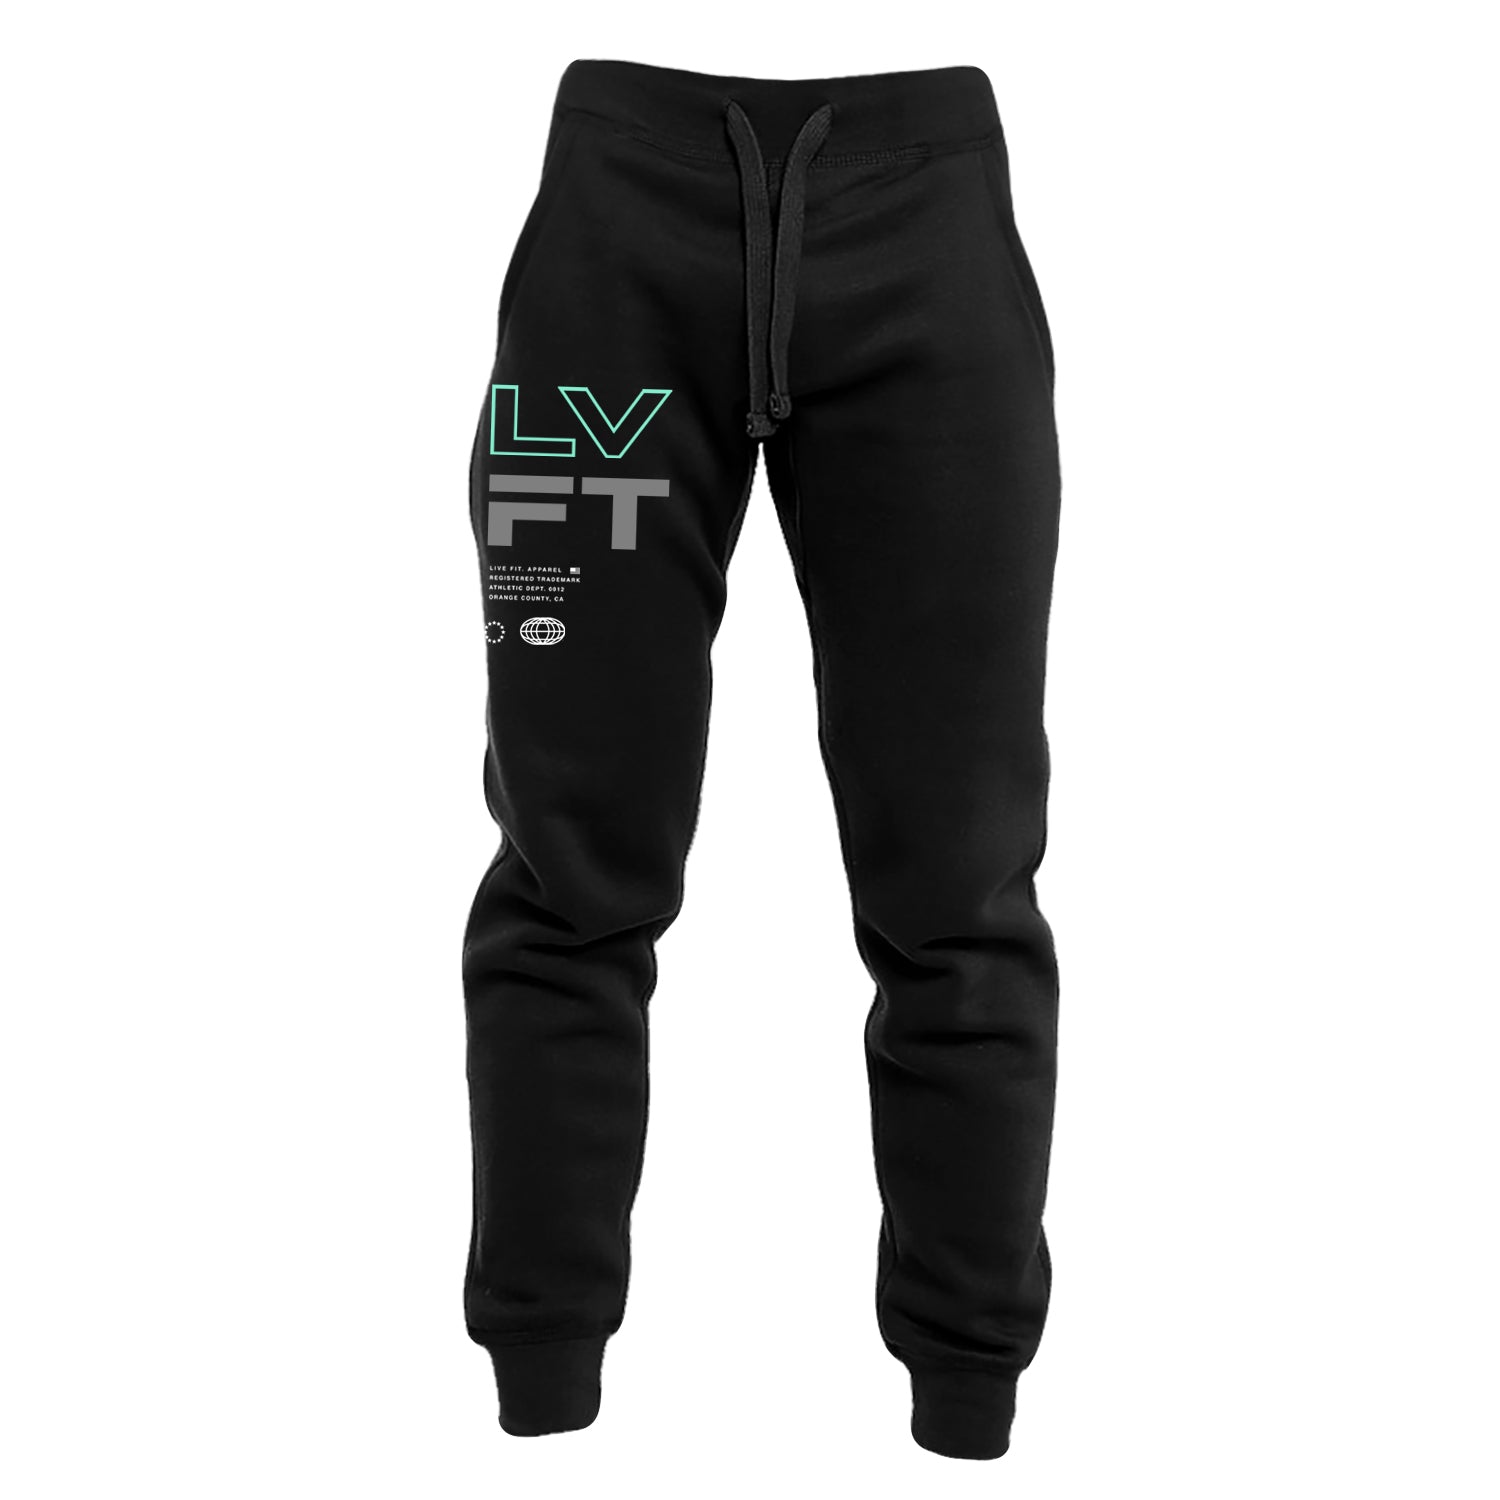 Men's Black Joggers: Shop All Black Jogger Pants For Great Street Style